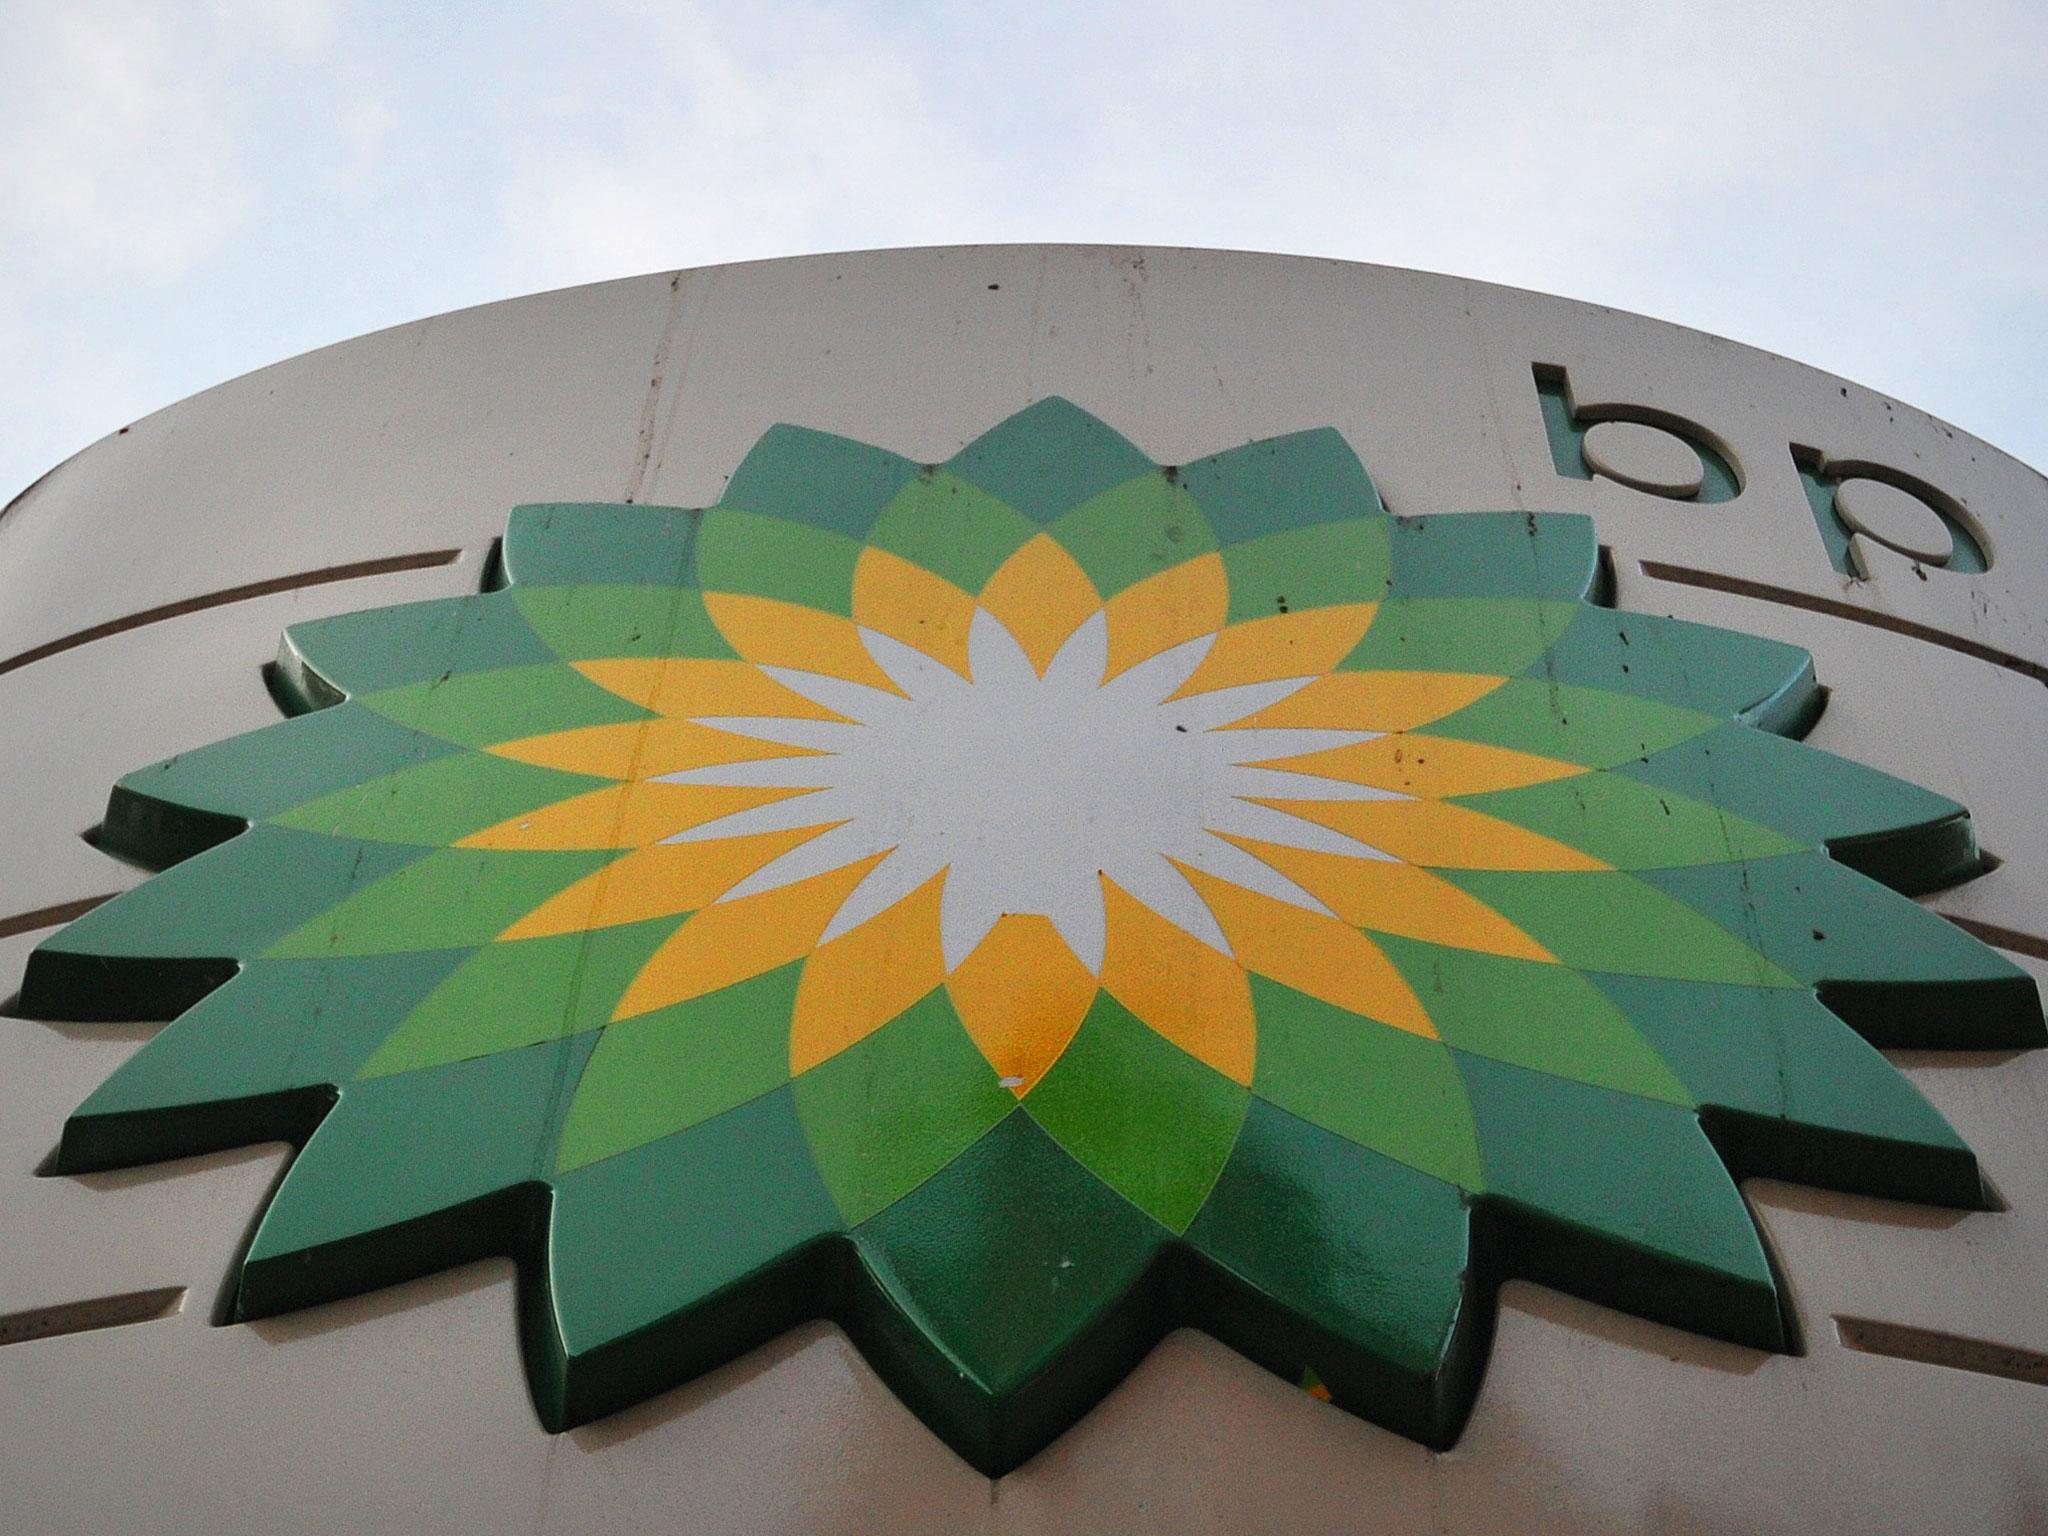 BP’s shares fell 1.4% yesterday following the US government Russian sanctions